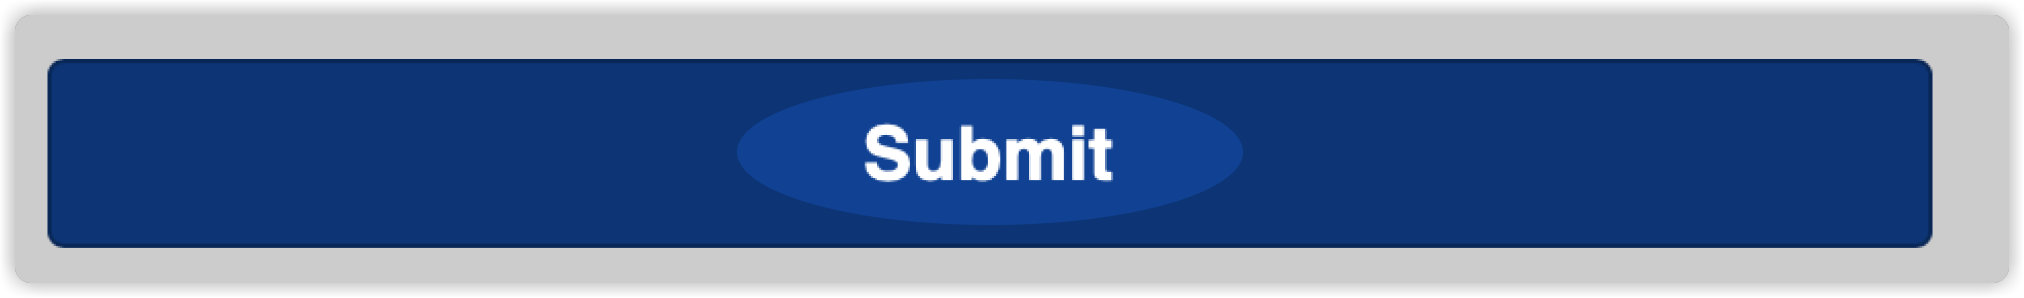 submit_2x.png